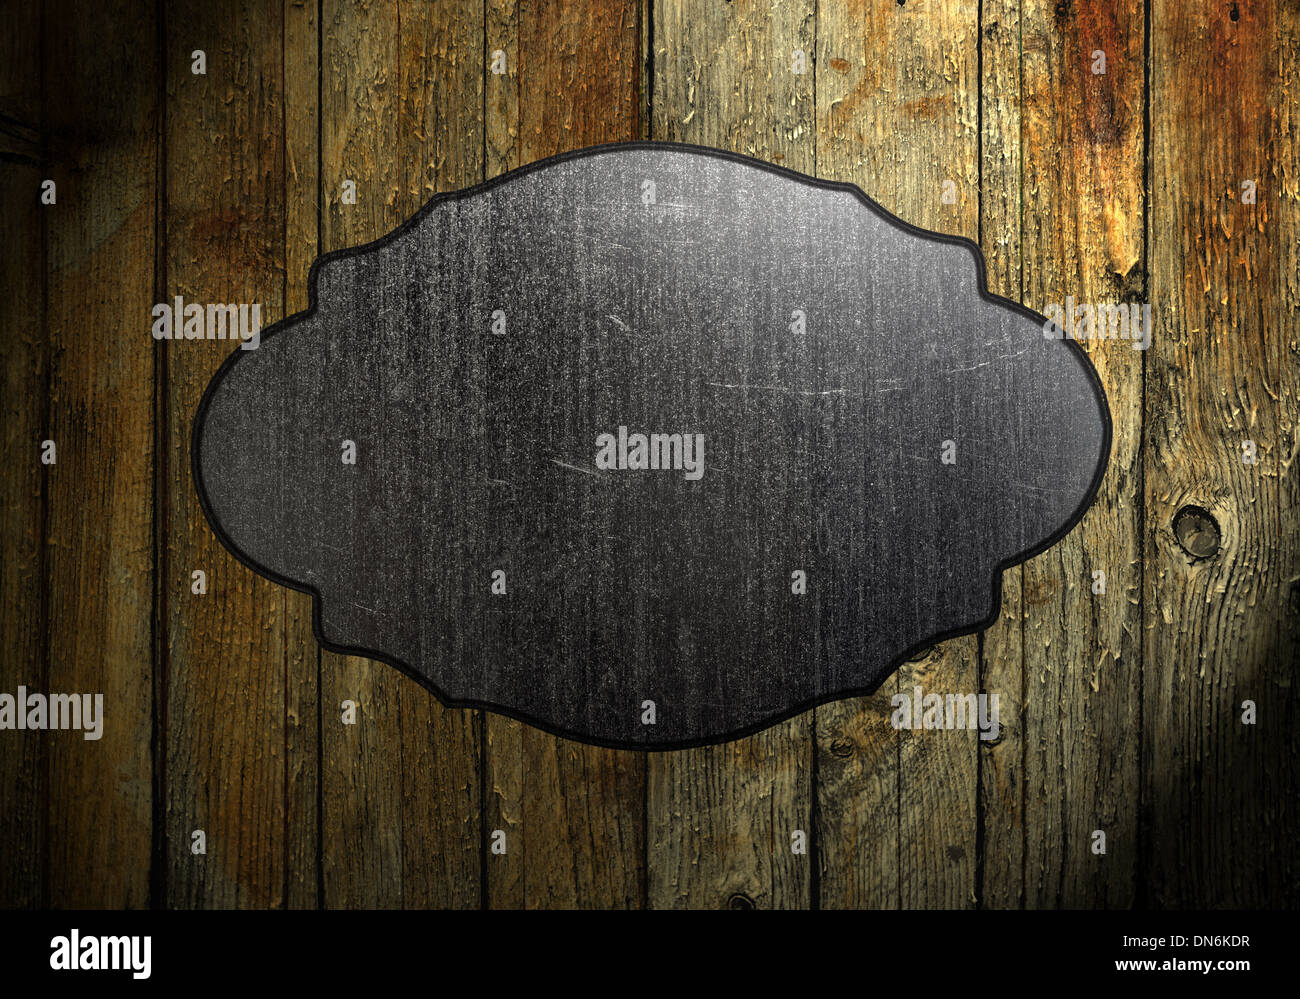 metal sign on wood plank background Stock Photo